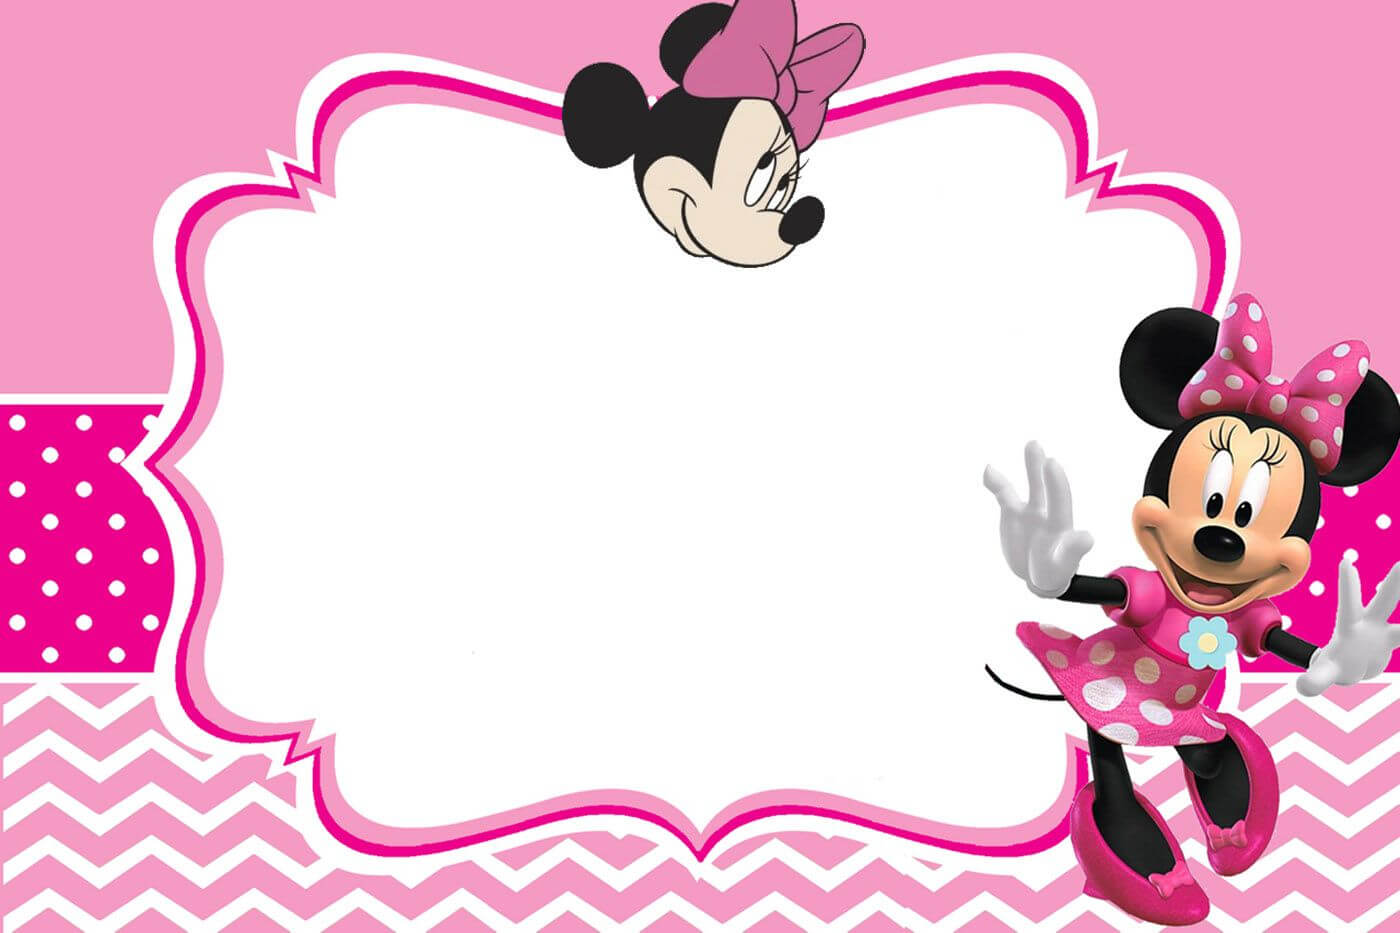 Minnie Mouse Invitation Card Design | Mickey Mouse Throughout Minnie Mouse Card Templates